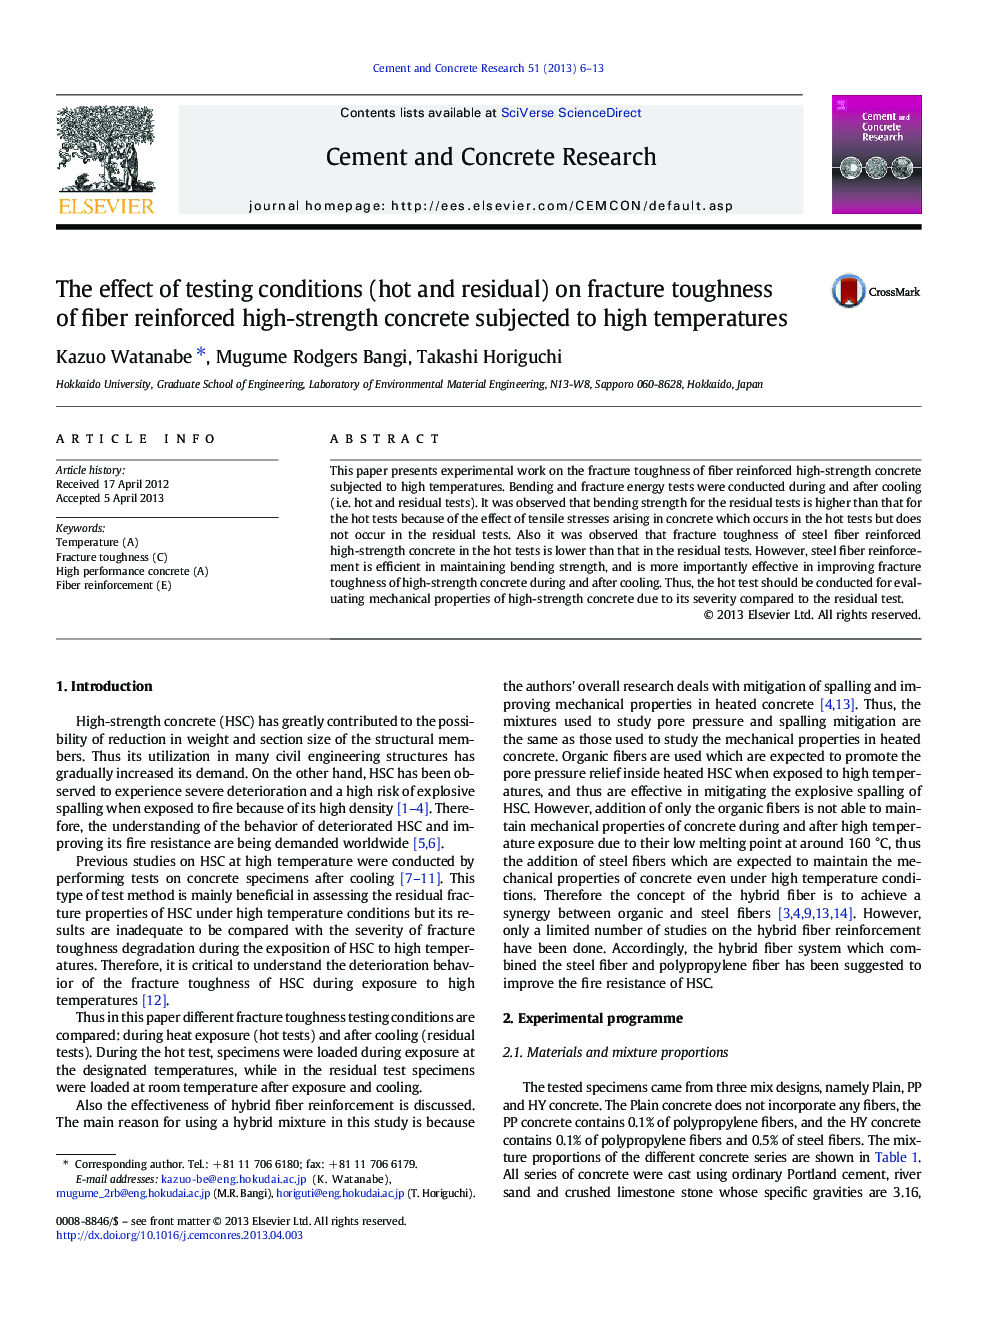 The effect of testing conditions (hot and residual) on fracture toughness of fiber reinforced high-strength concrete subjected to high temperatures